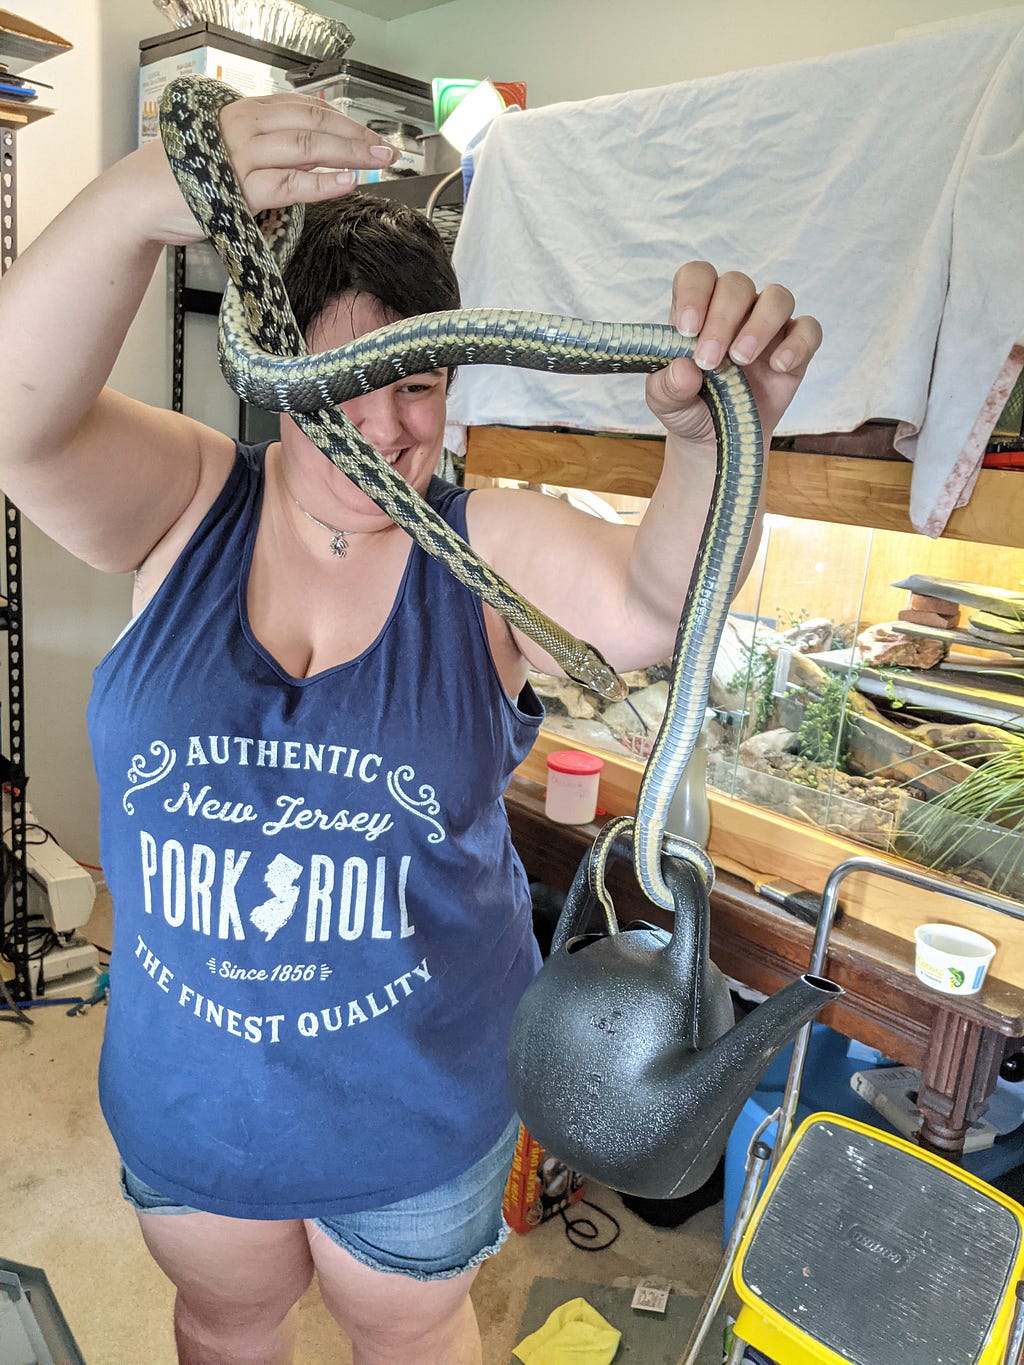 A short, chubby woman wearing an oversized blue tank top and denim shorts holds a long, slender snake up in front of her. The snake has a busy pattern comprised of diamonds fading to stripes in contrasting shades of dark and light green. The snake’s tail is wrapped around the handle of a small black plastic watering can, which it is holding well off the ground.